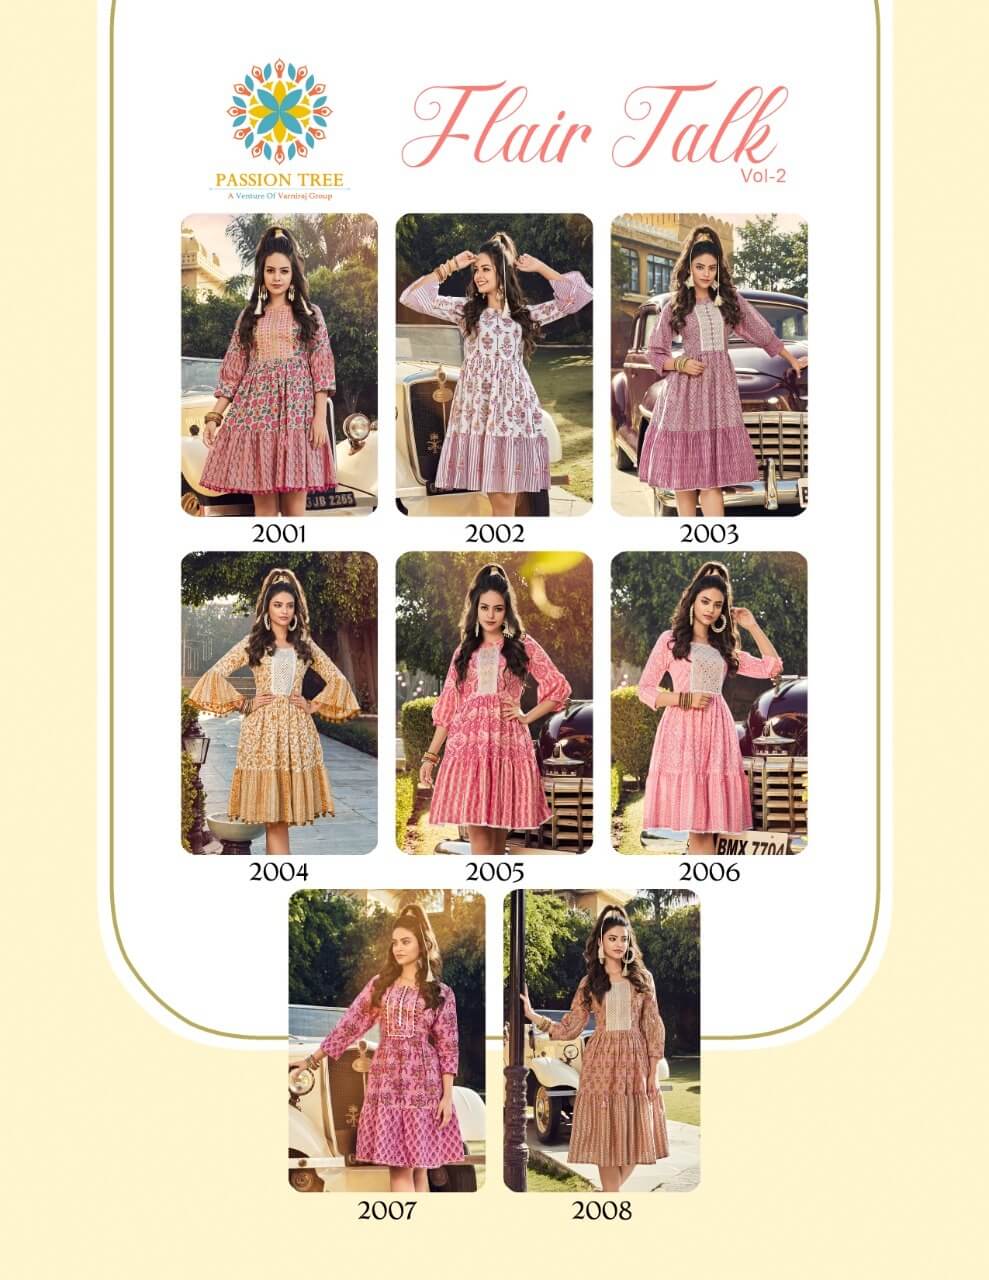 Passion Tree Flair Talk Vol 2 One Piece Dress Catalog collection 8